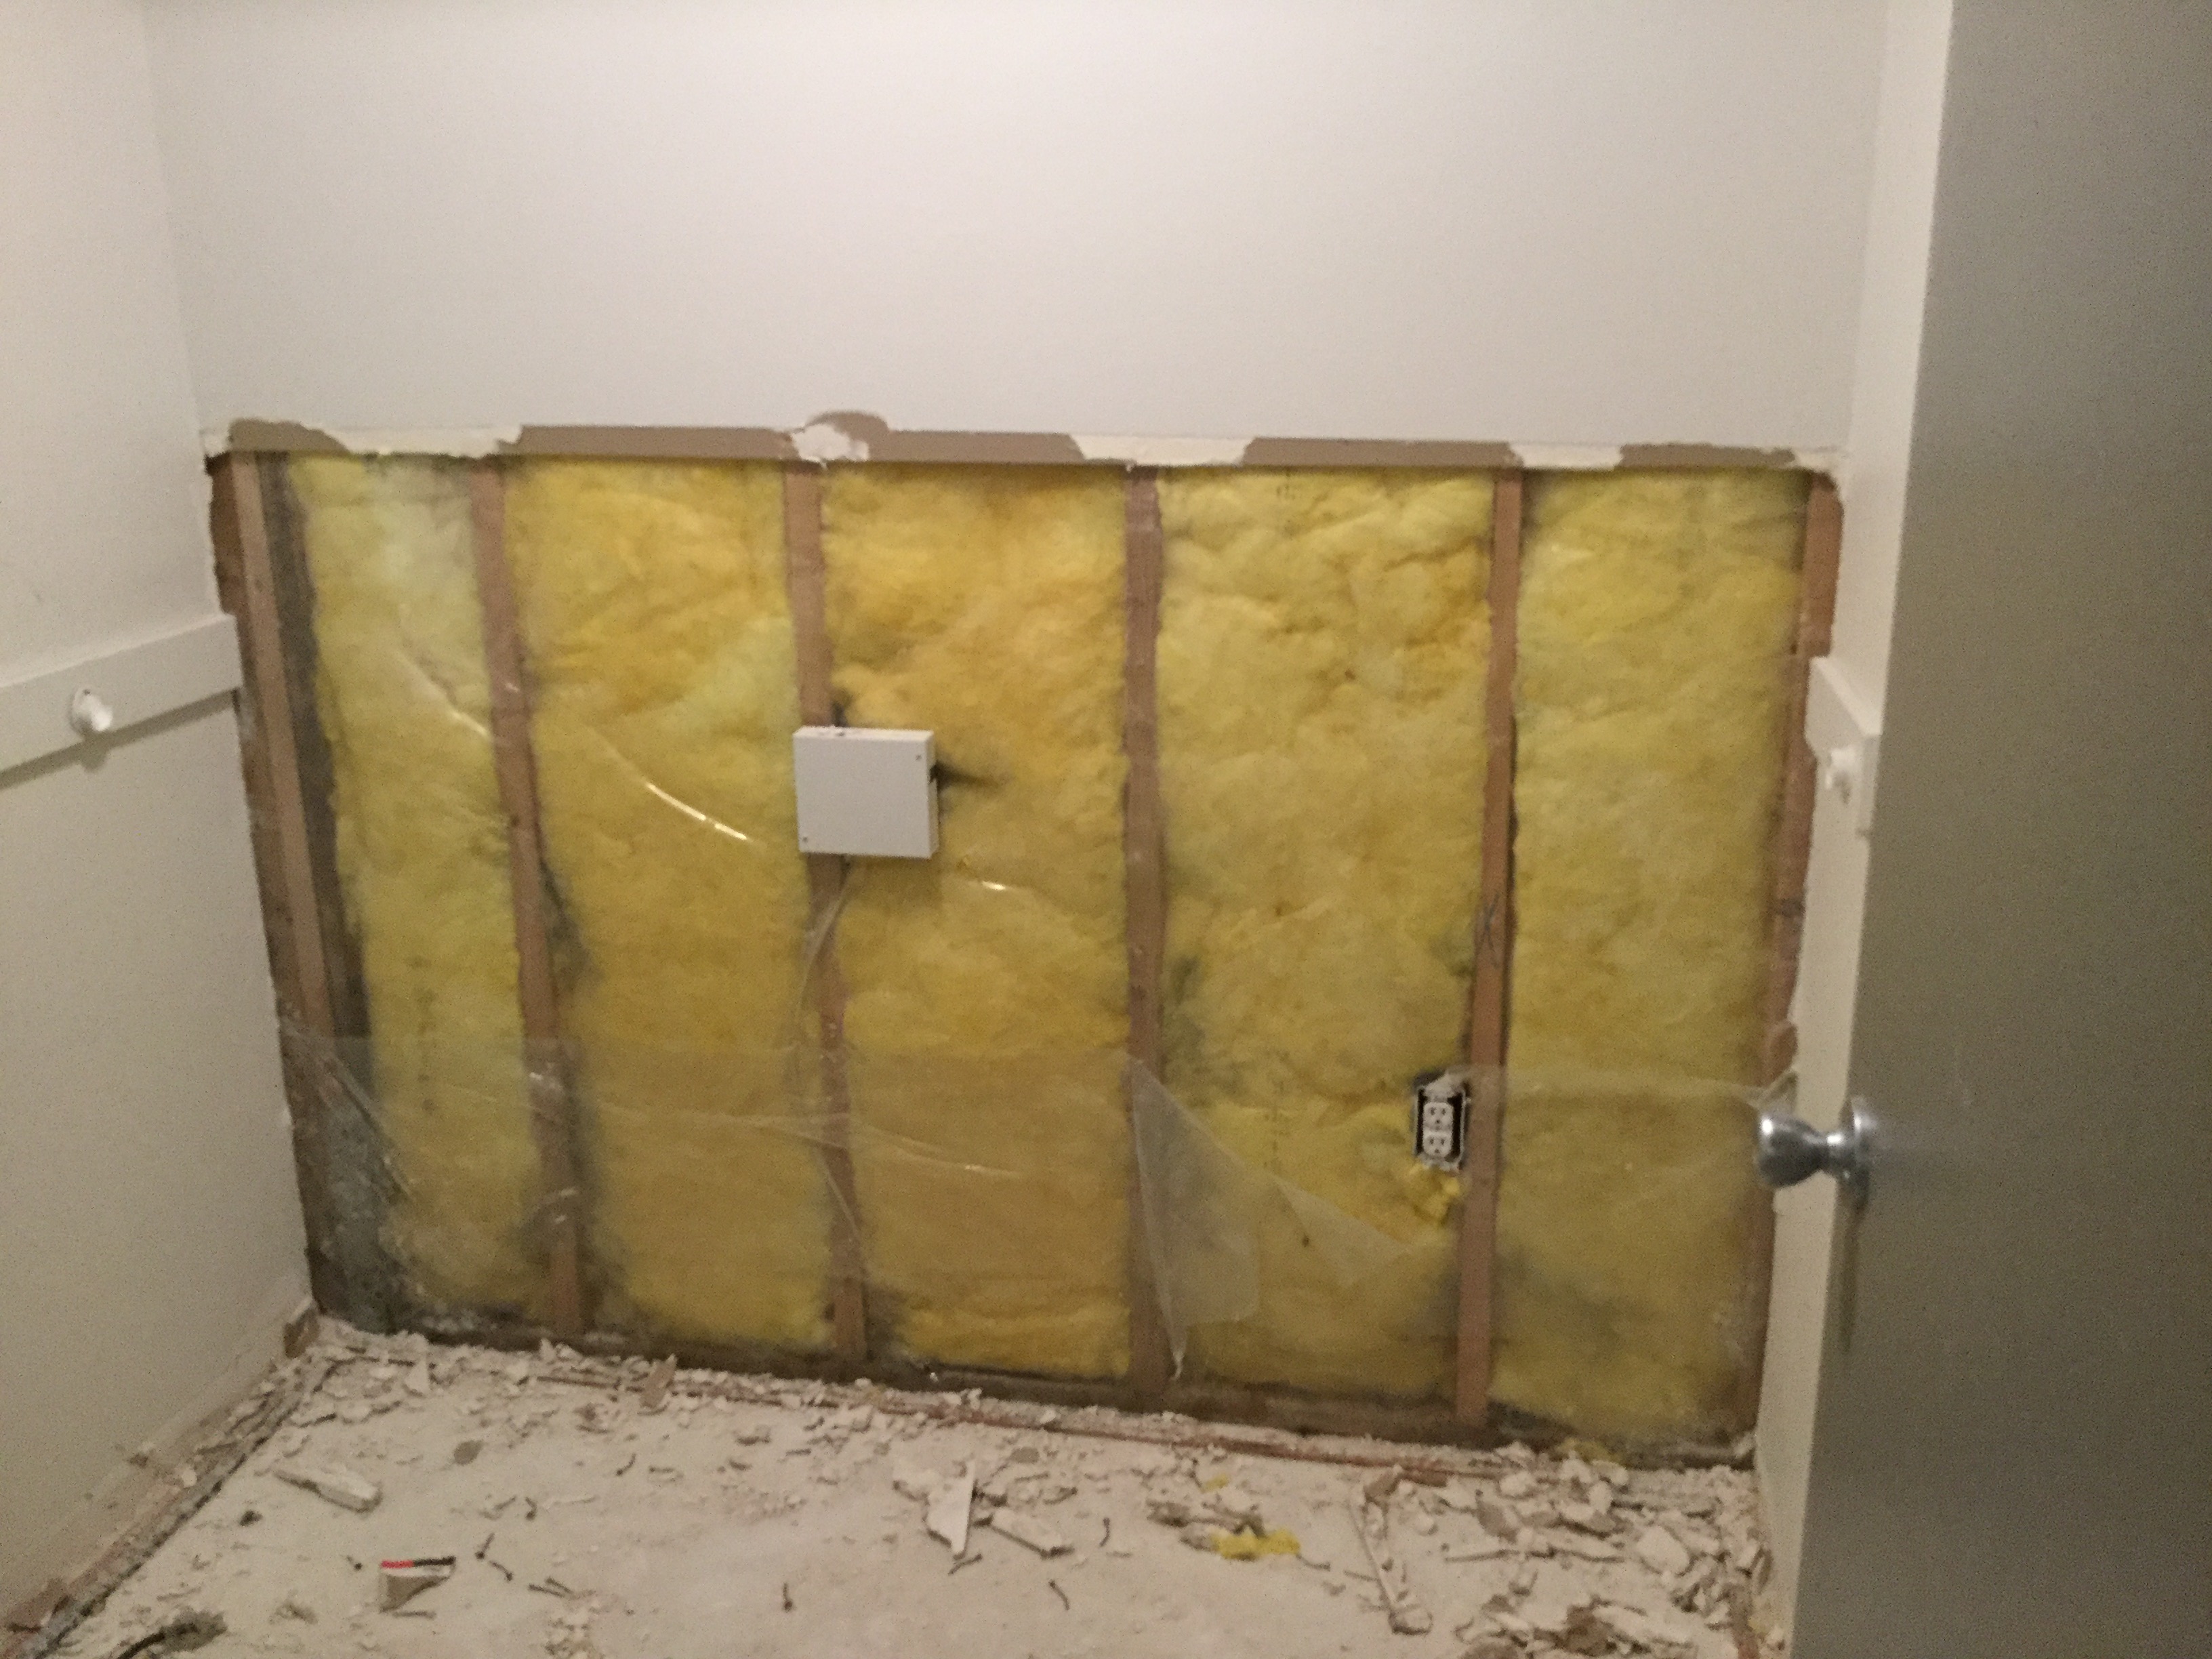 It is so important that you give SERVPRO of Shoreline/Woodinville a call at the first signs of water damage so that we can mitigate any damages and prevent additional mold growth.